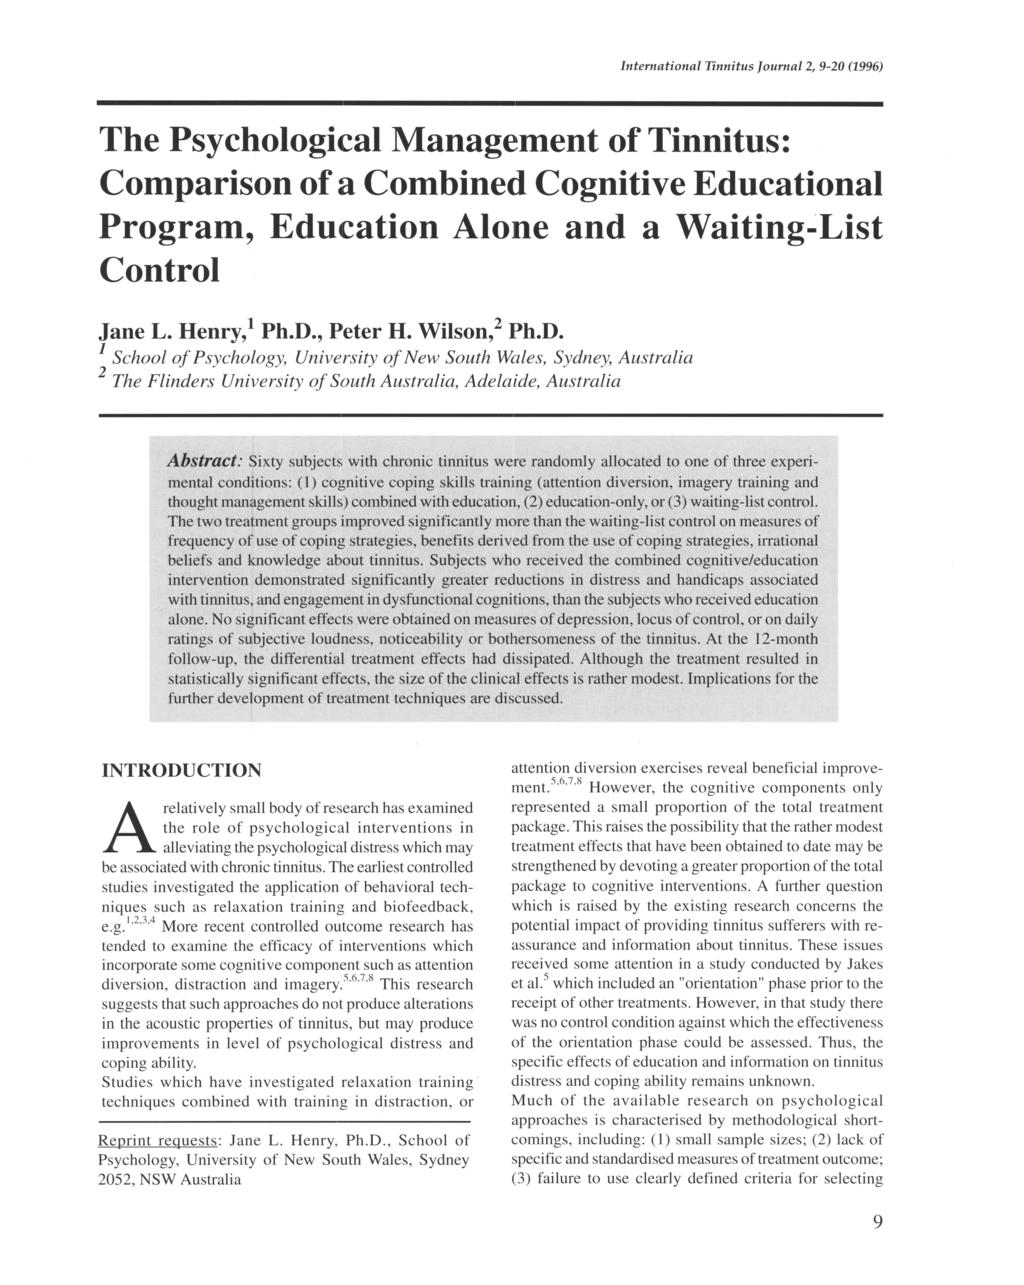 International Tinnitus Journal 2, 9-20 (1996) The Psychological Management of Tinnitus: Comparison of a Combined Cognitive Educational Program, Education Alone and a Waiting~List Control Jane L.